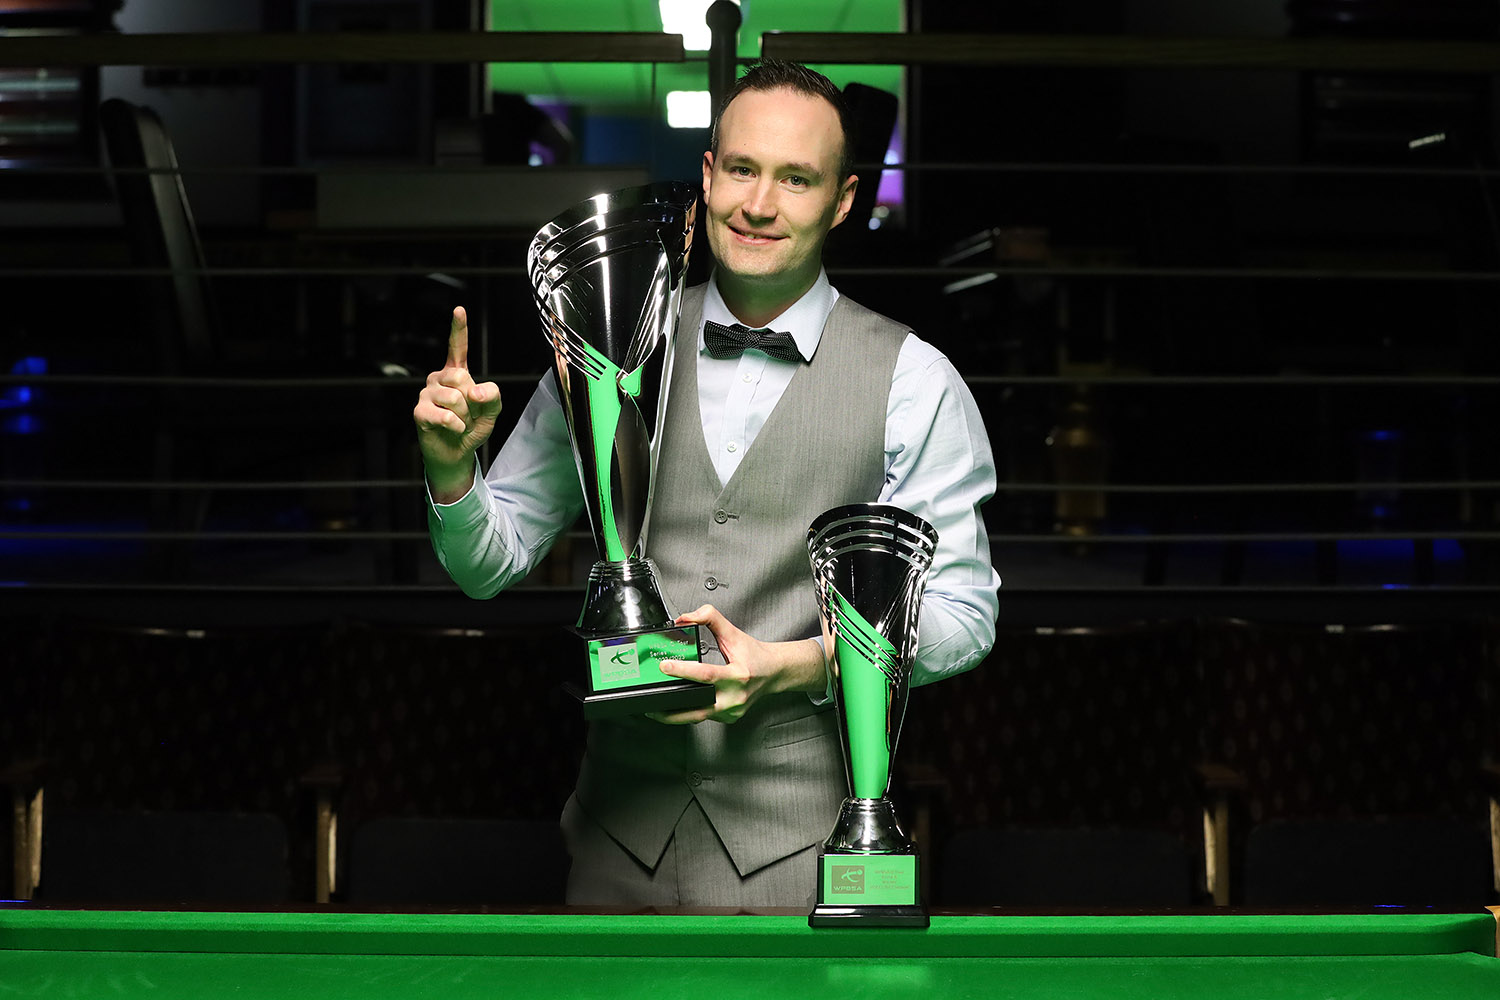 2023 World Snooker Championship Schedule, Draw, Dates & Rounds